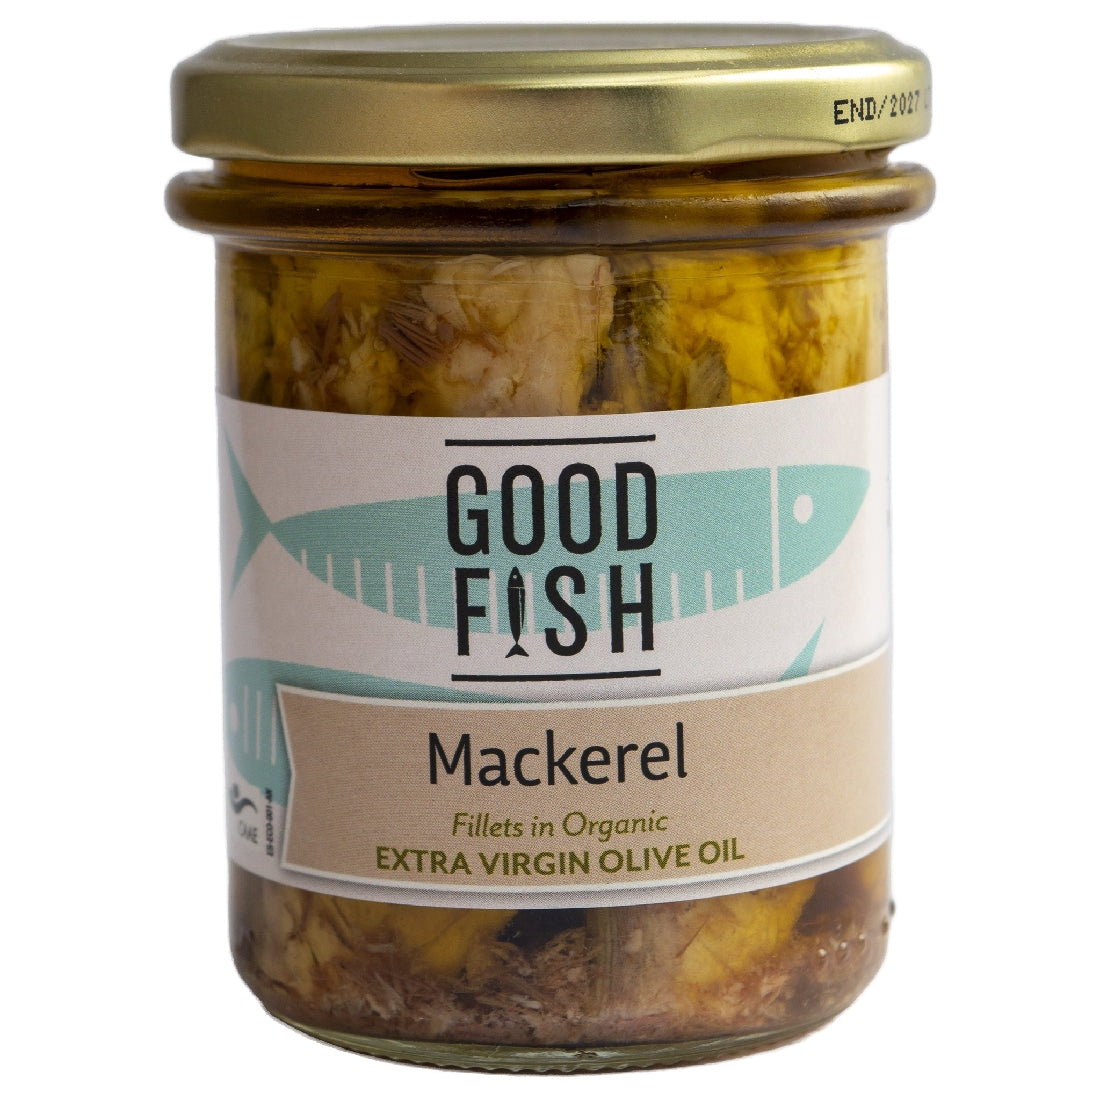 GOOD FISH MACKEREL WITH OLIVE OIL 195G